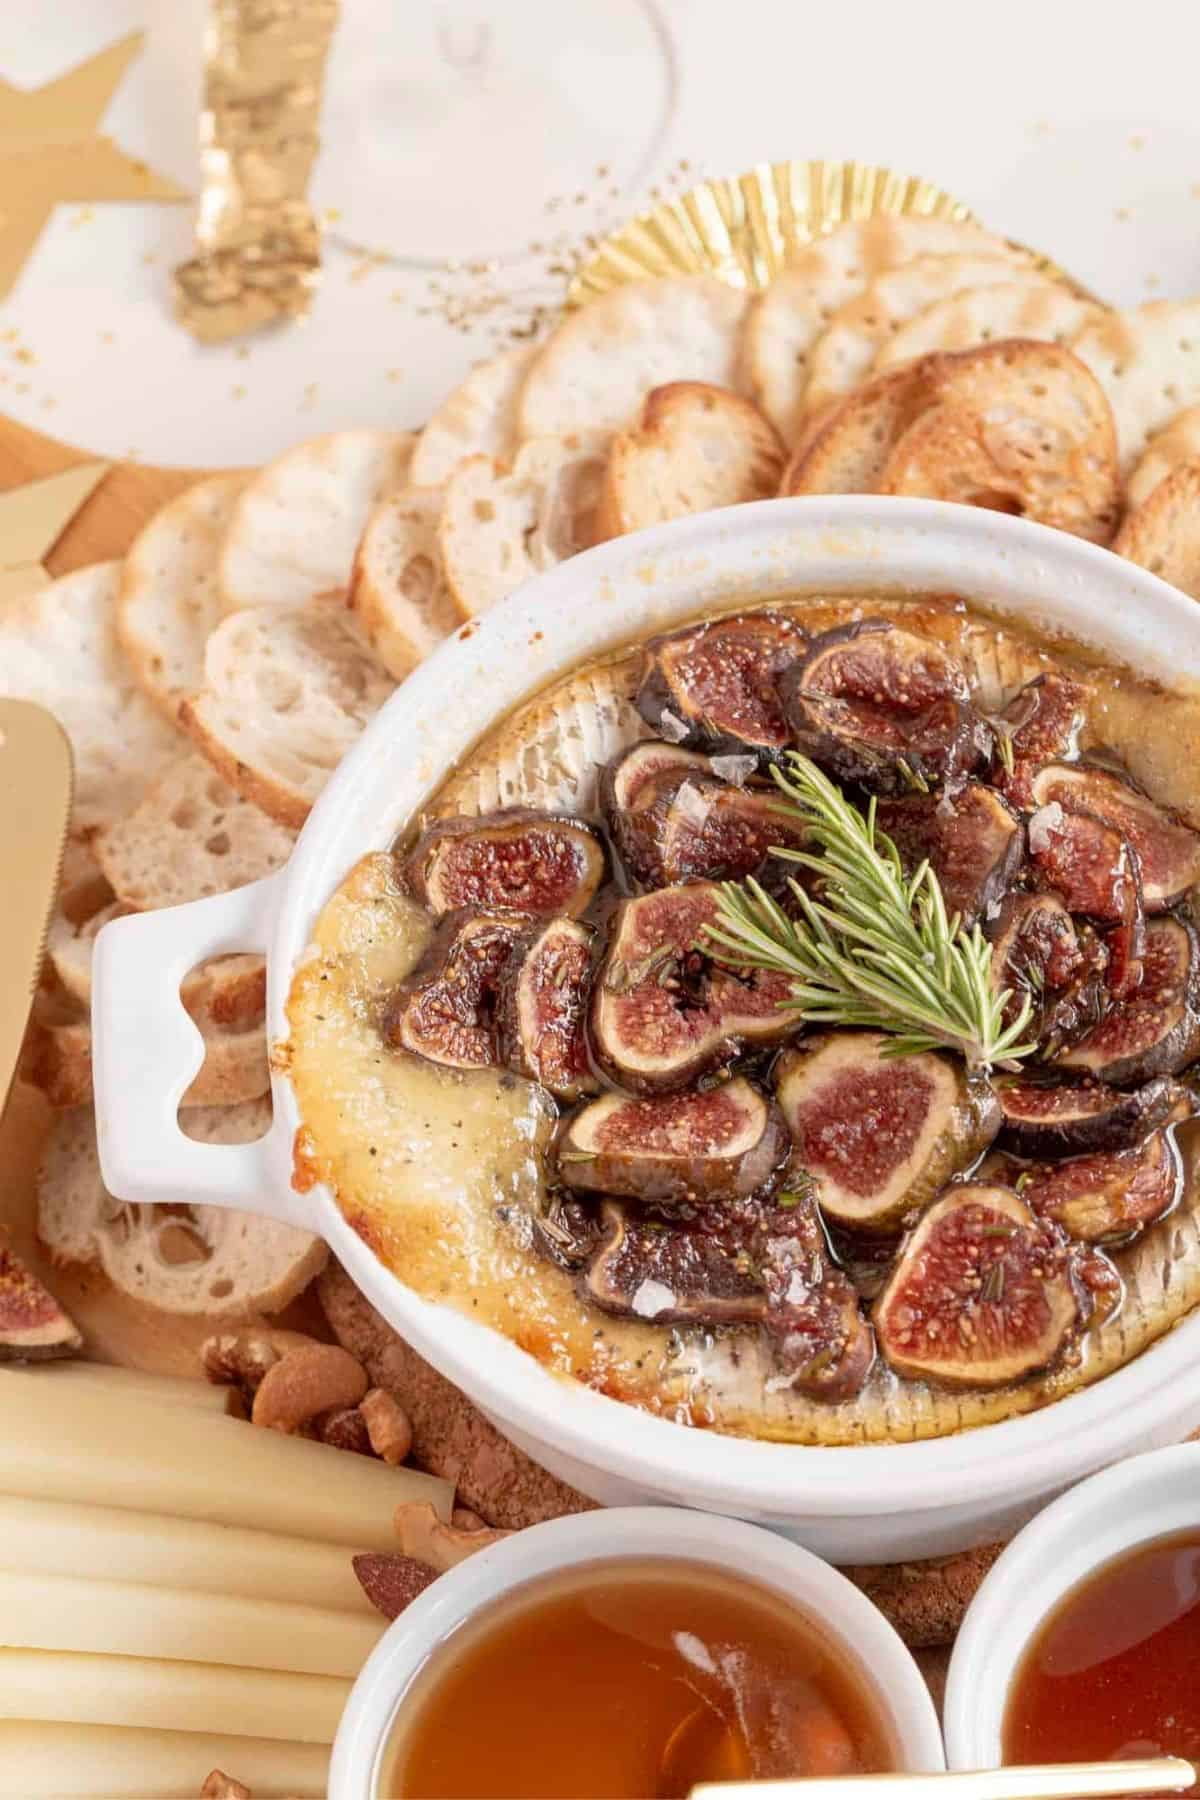 baked brie salty and sweet board with NYE decor